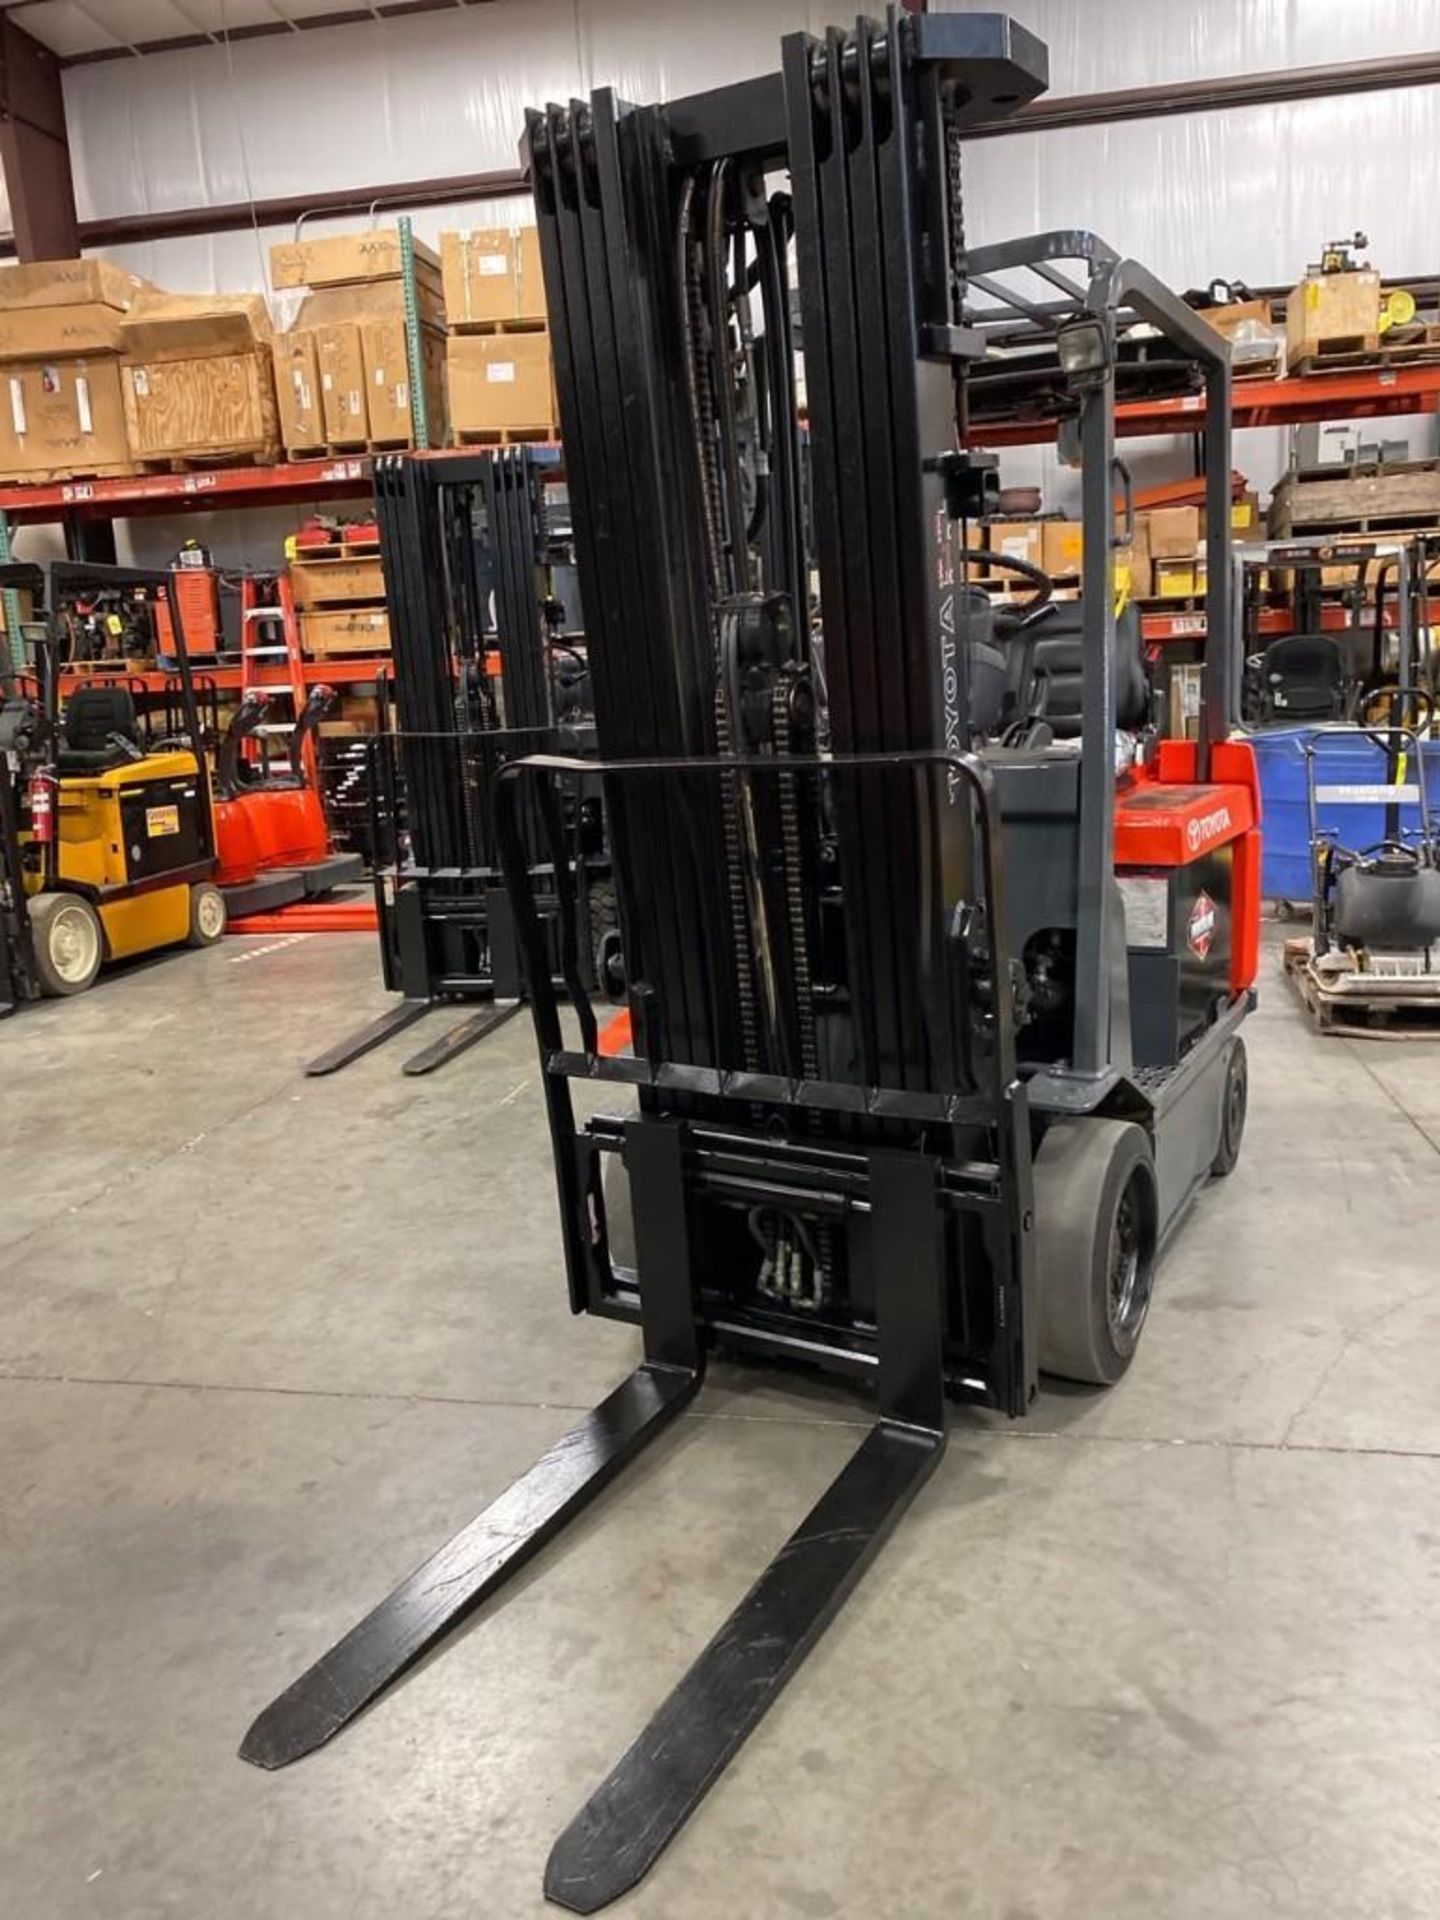 2008 TOYOTA ELECTRIC FORKLIFT MODEL 7FBCU25, 2017 BATTERY, 276" HEIGHT CAPACITY, APPROX. 5,000 LB CA - Image 6 of 9